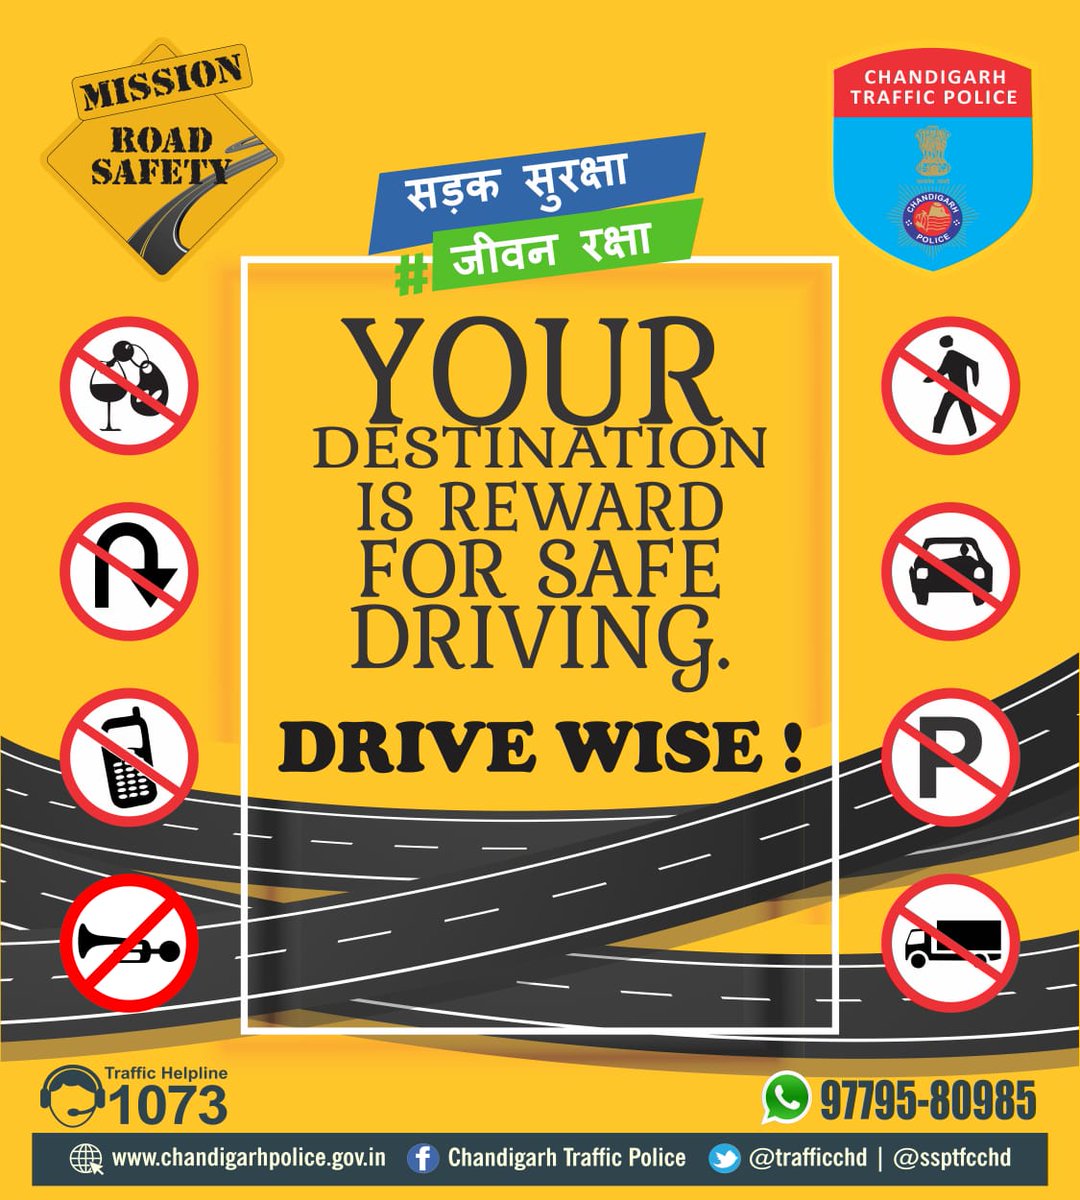 'Road Safety, Our Priority'
If you’re not safety conscious, you could end up unconscious.
SO THINK ABOUT SAFETY OF ALL!
#RoadSafety #GoldenRule #savefuture #safetyfirst #staysafe
#WeCareForYou